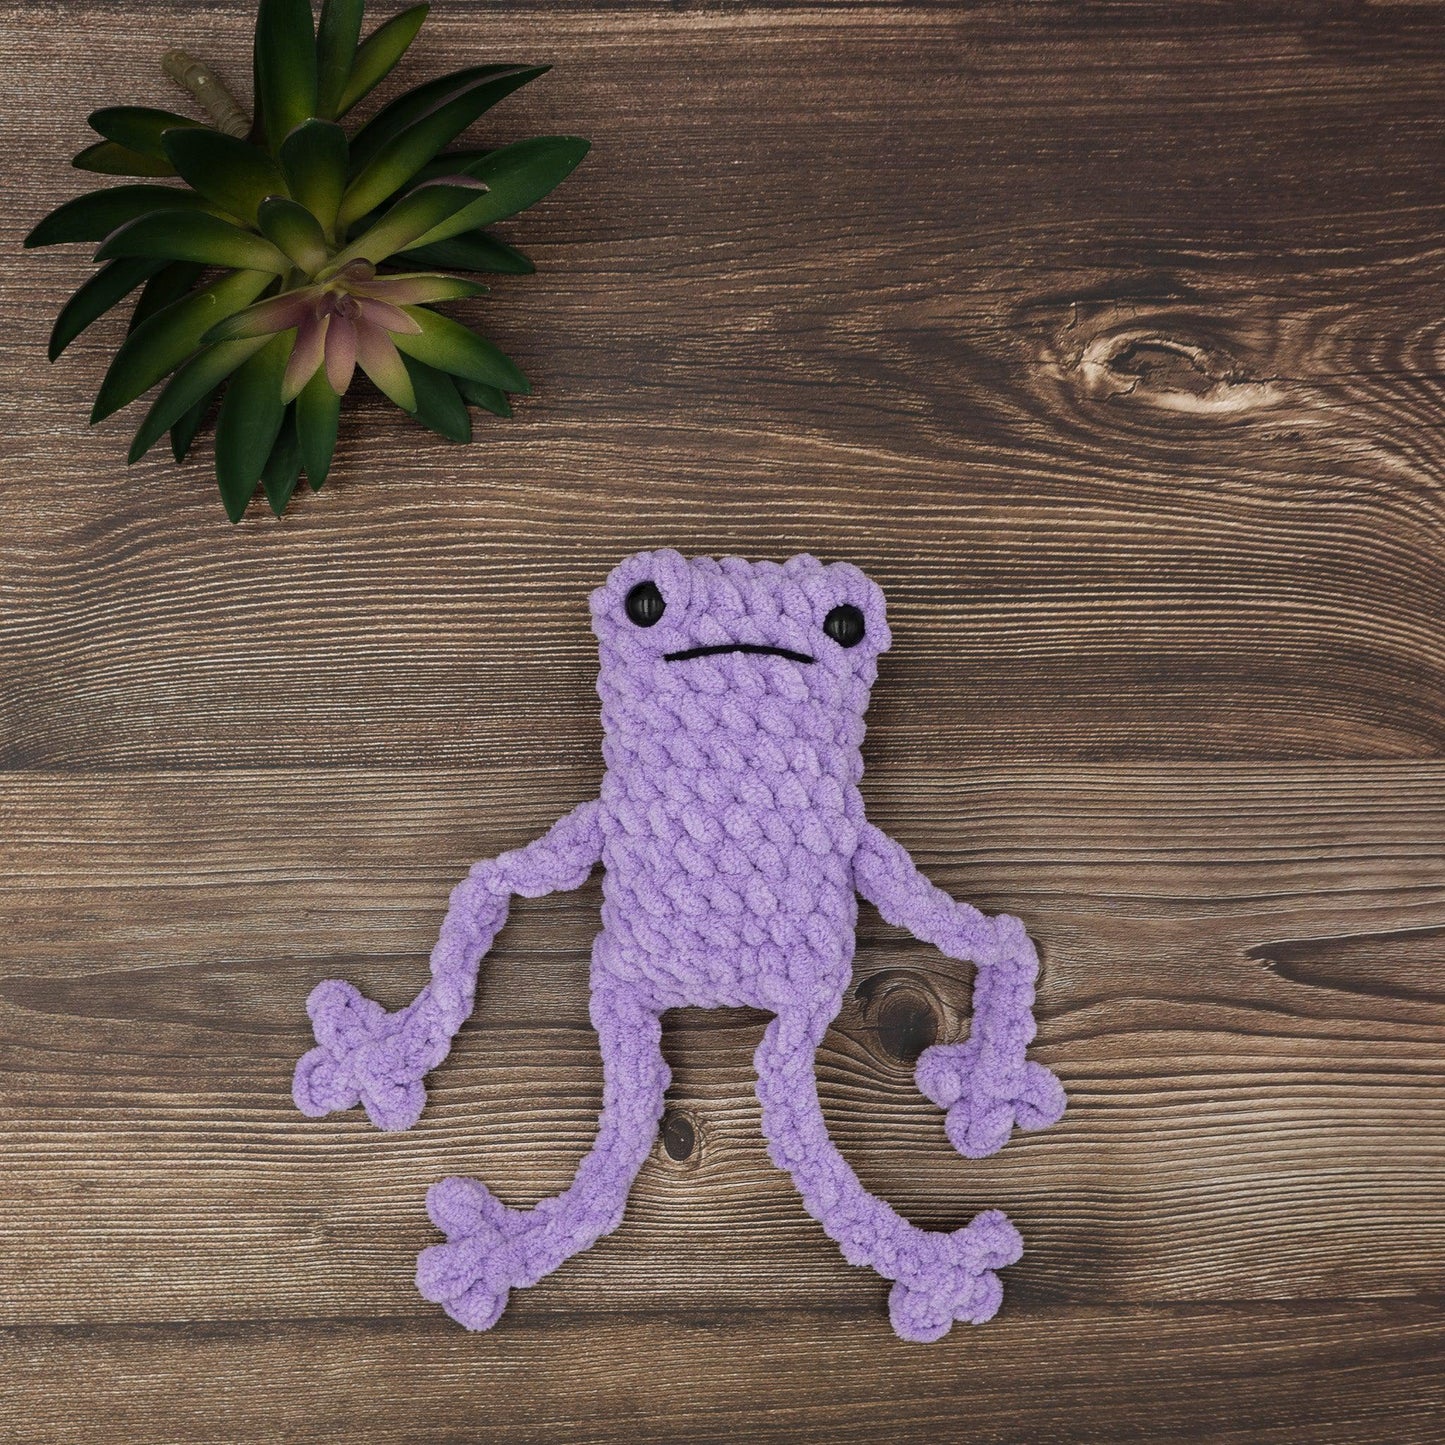 4Stitches Designs 10 Inch Frog Plush Toy - Hand-Made Stuffed Animal Gift for Kids